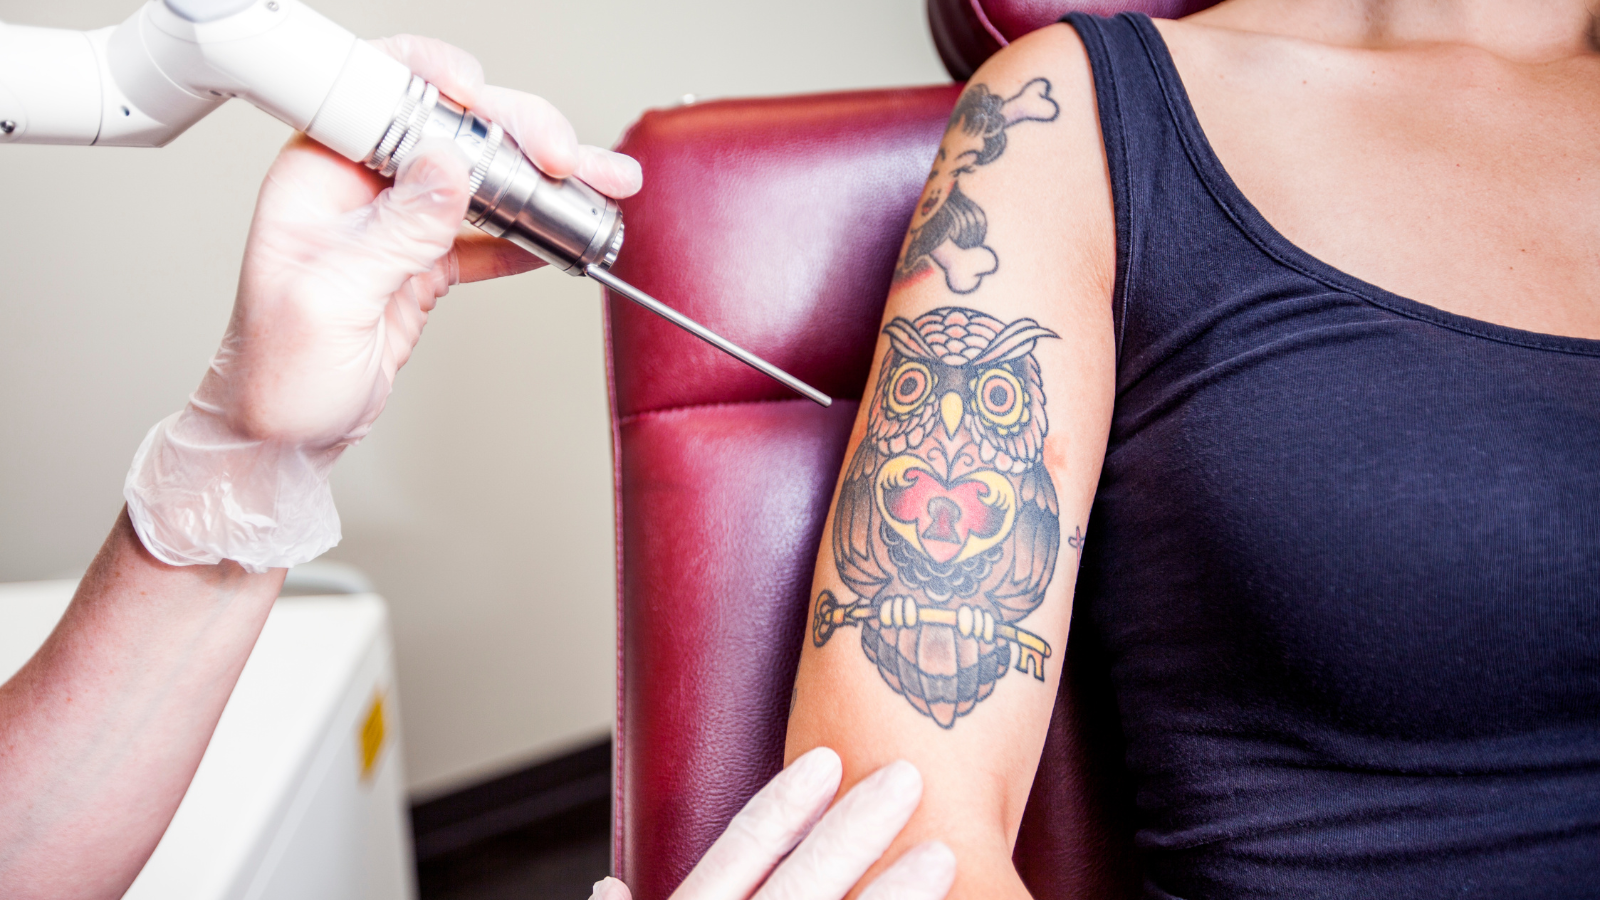 Tattoo and Body Piercing Studio Inspections